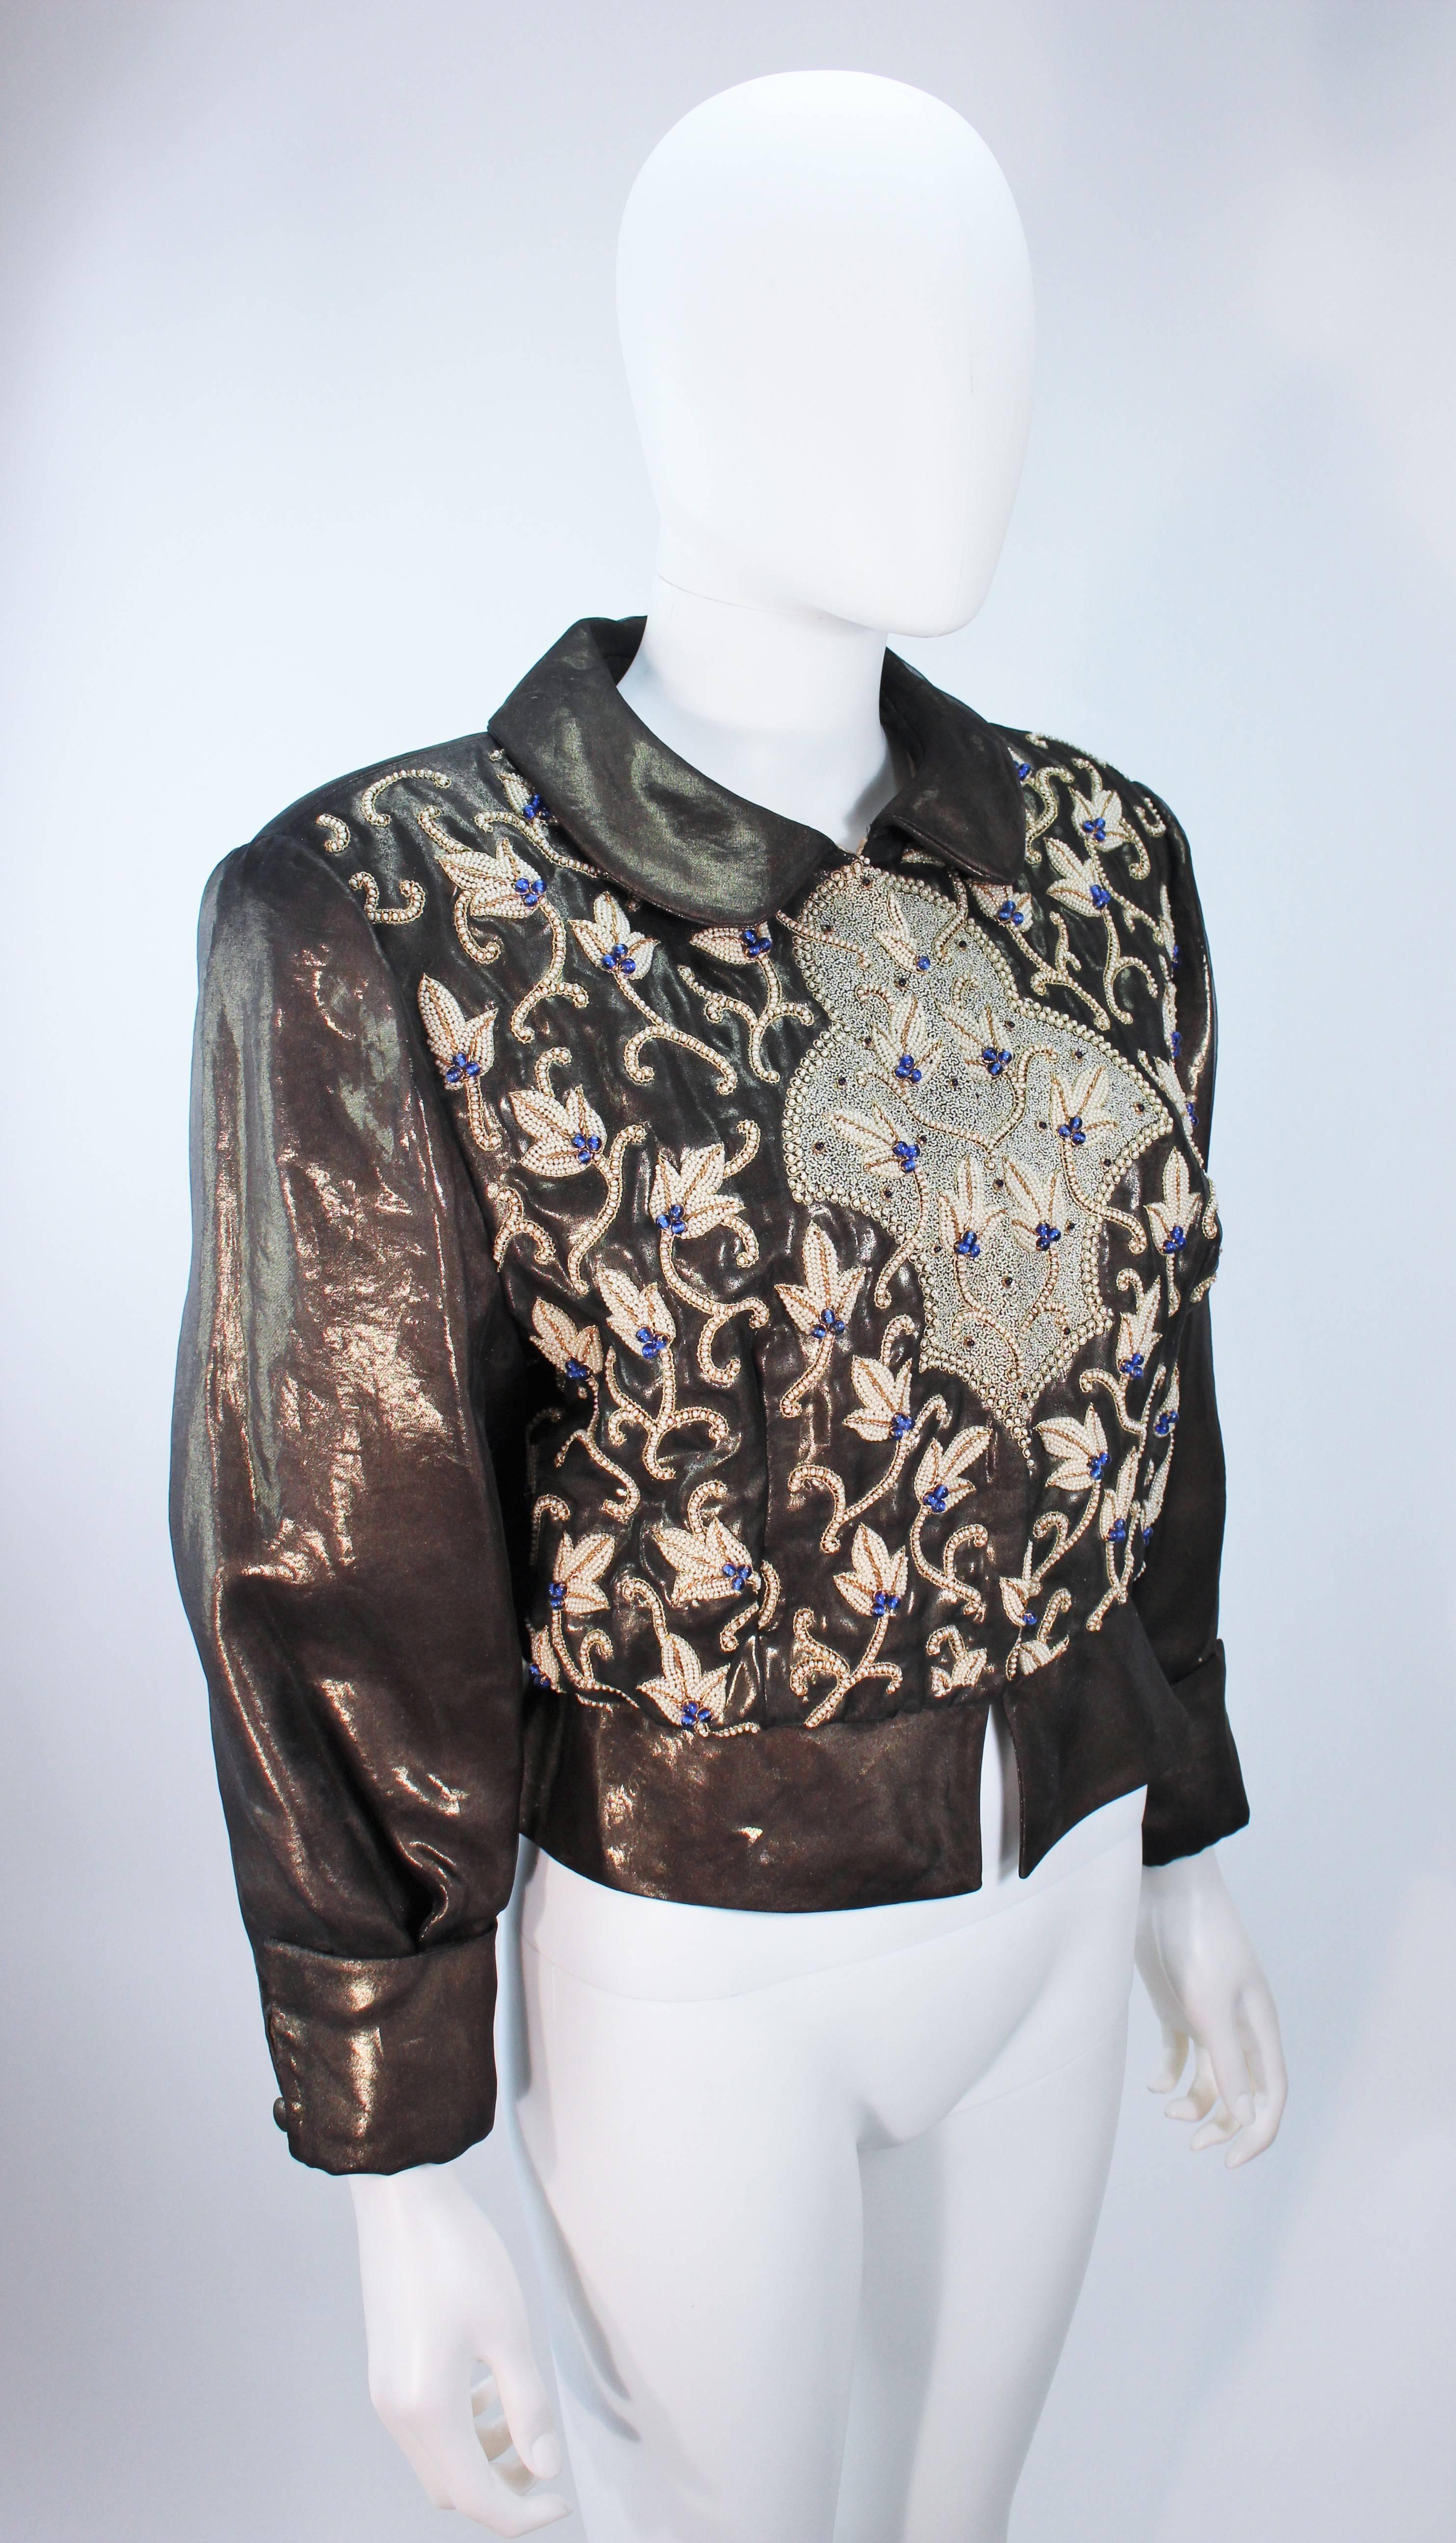 Women's GIORGIO ARMANI Bronze Jacket with Bead Applique and Embroidery Size 44 10